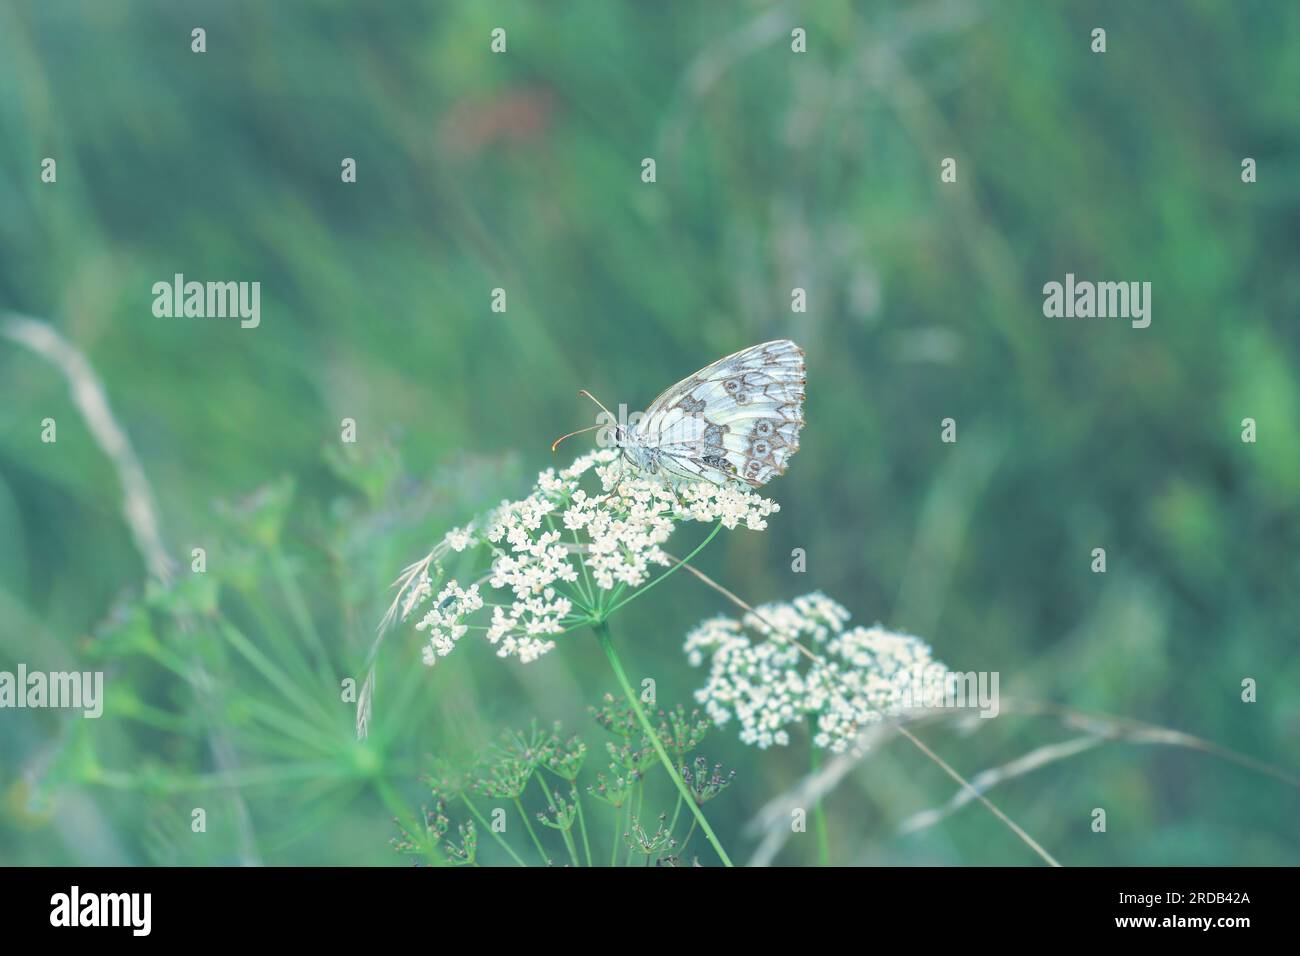 Marbled white beauty butterfly sitting on Cow Parsley white flowers in spring green field. Melanargia galathea sits on Anthriscus sylvestris in summer Stock Photo